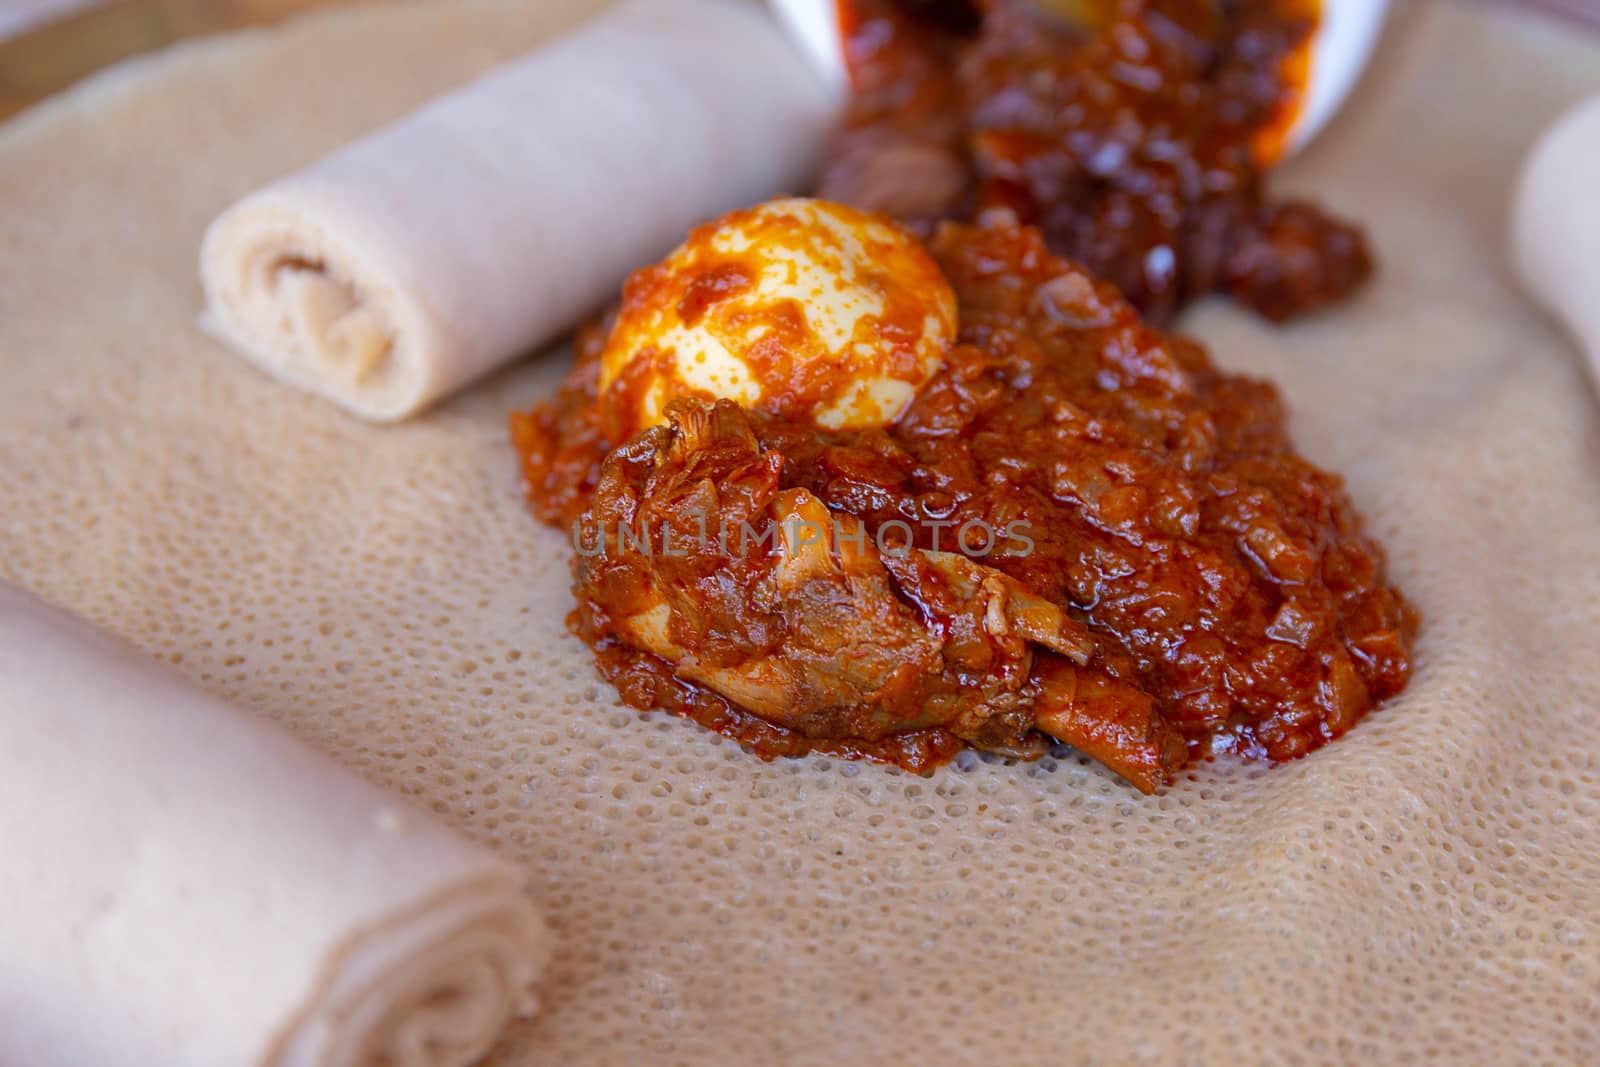 Injera served with Chicken and egg Doro Wat.  Injera is a sourdough flatbread made from teff flour.  It is the national dish of Ethiopia, Eritrea, Somalia and Djibouti